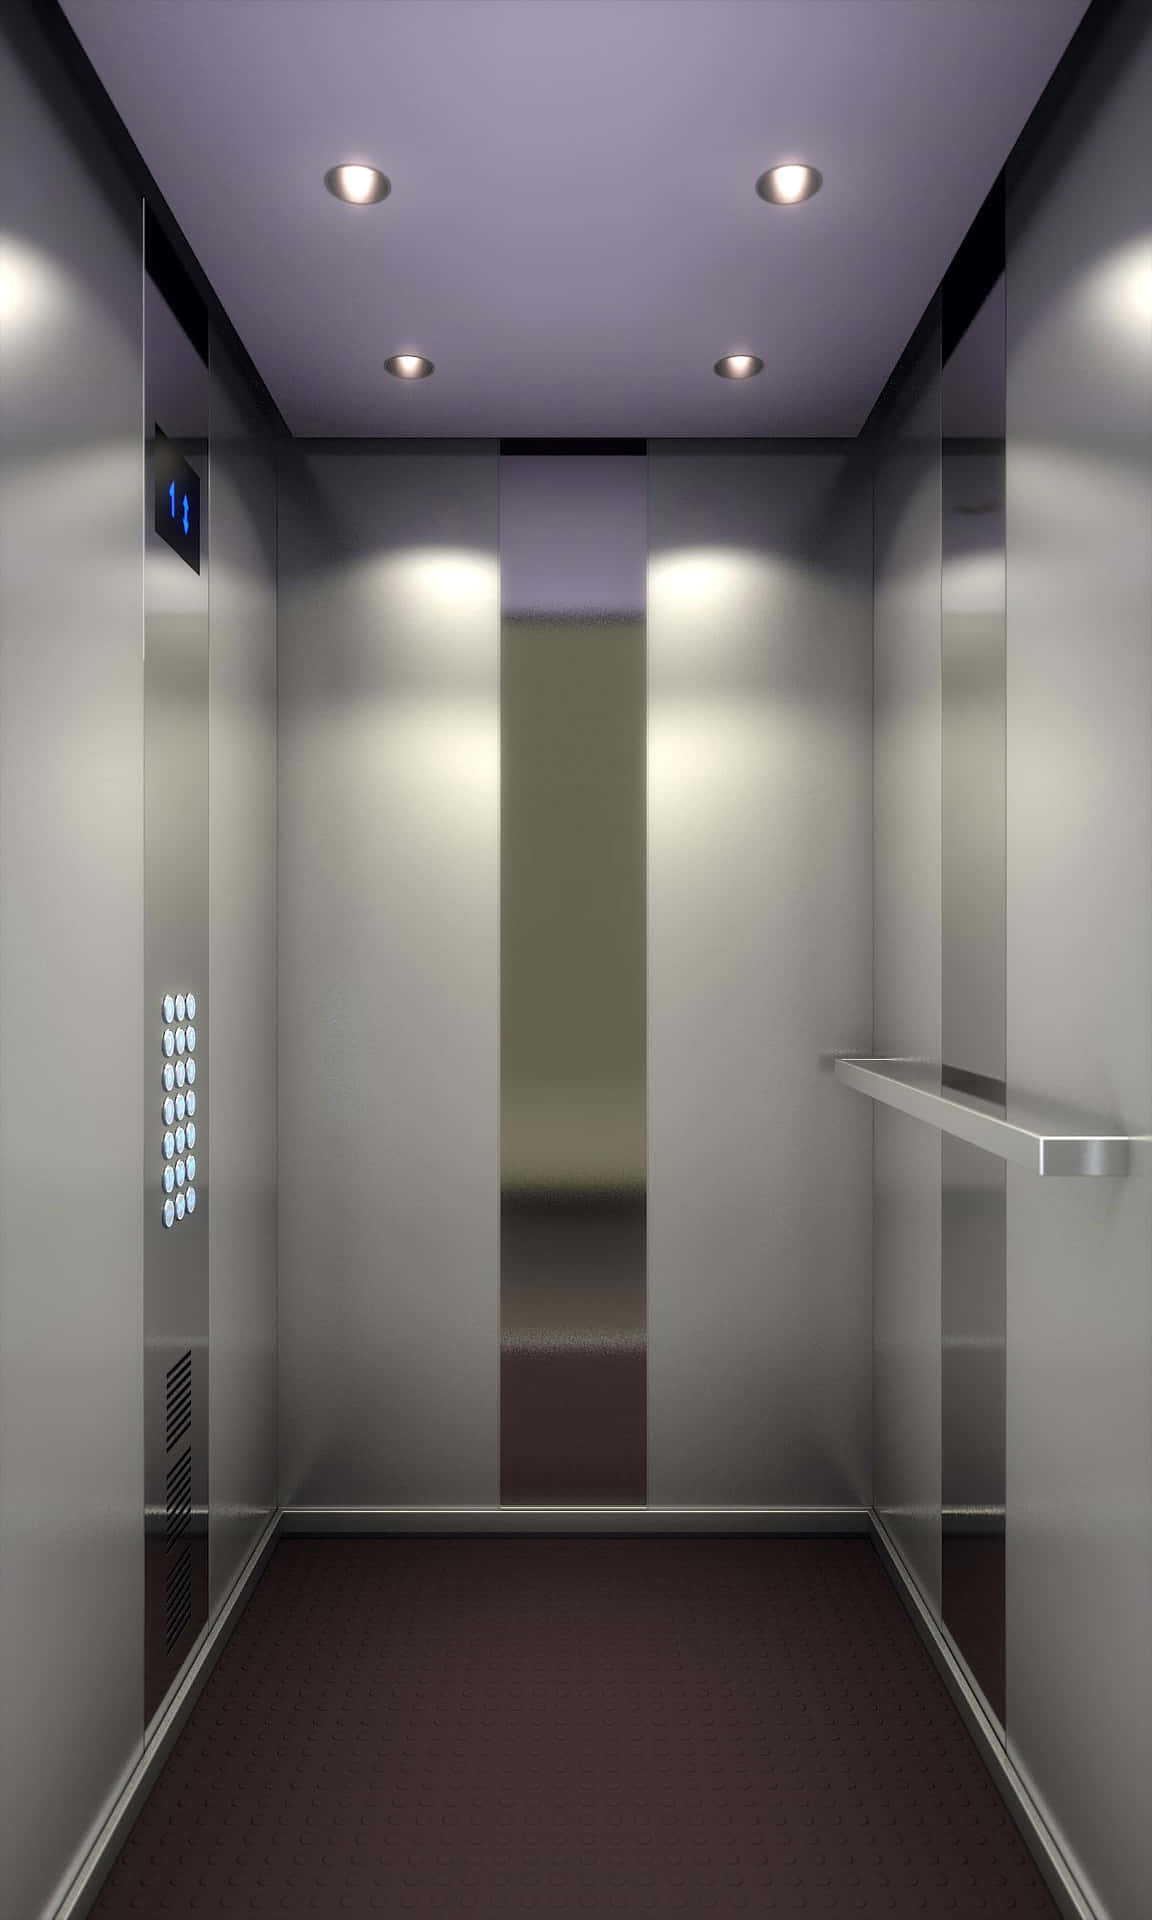 A Modern Elevator With A Purple Floor